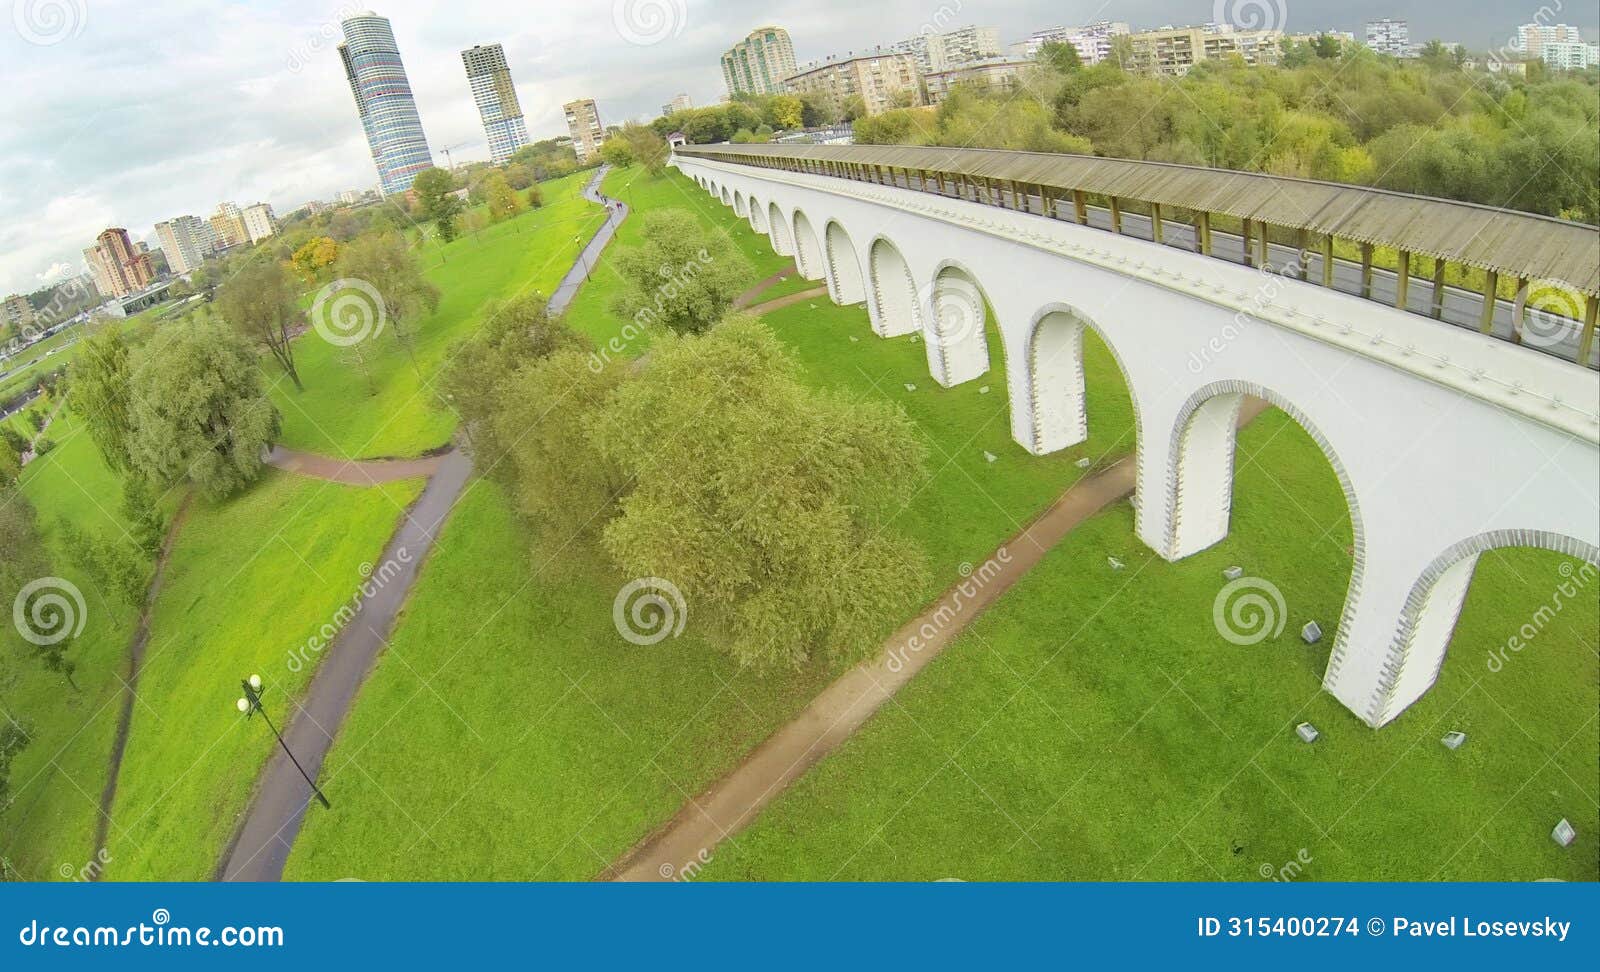 green park with aqueduct in city. view from